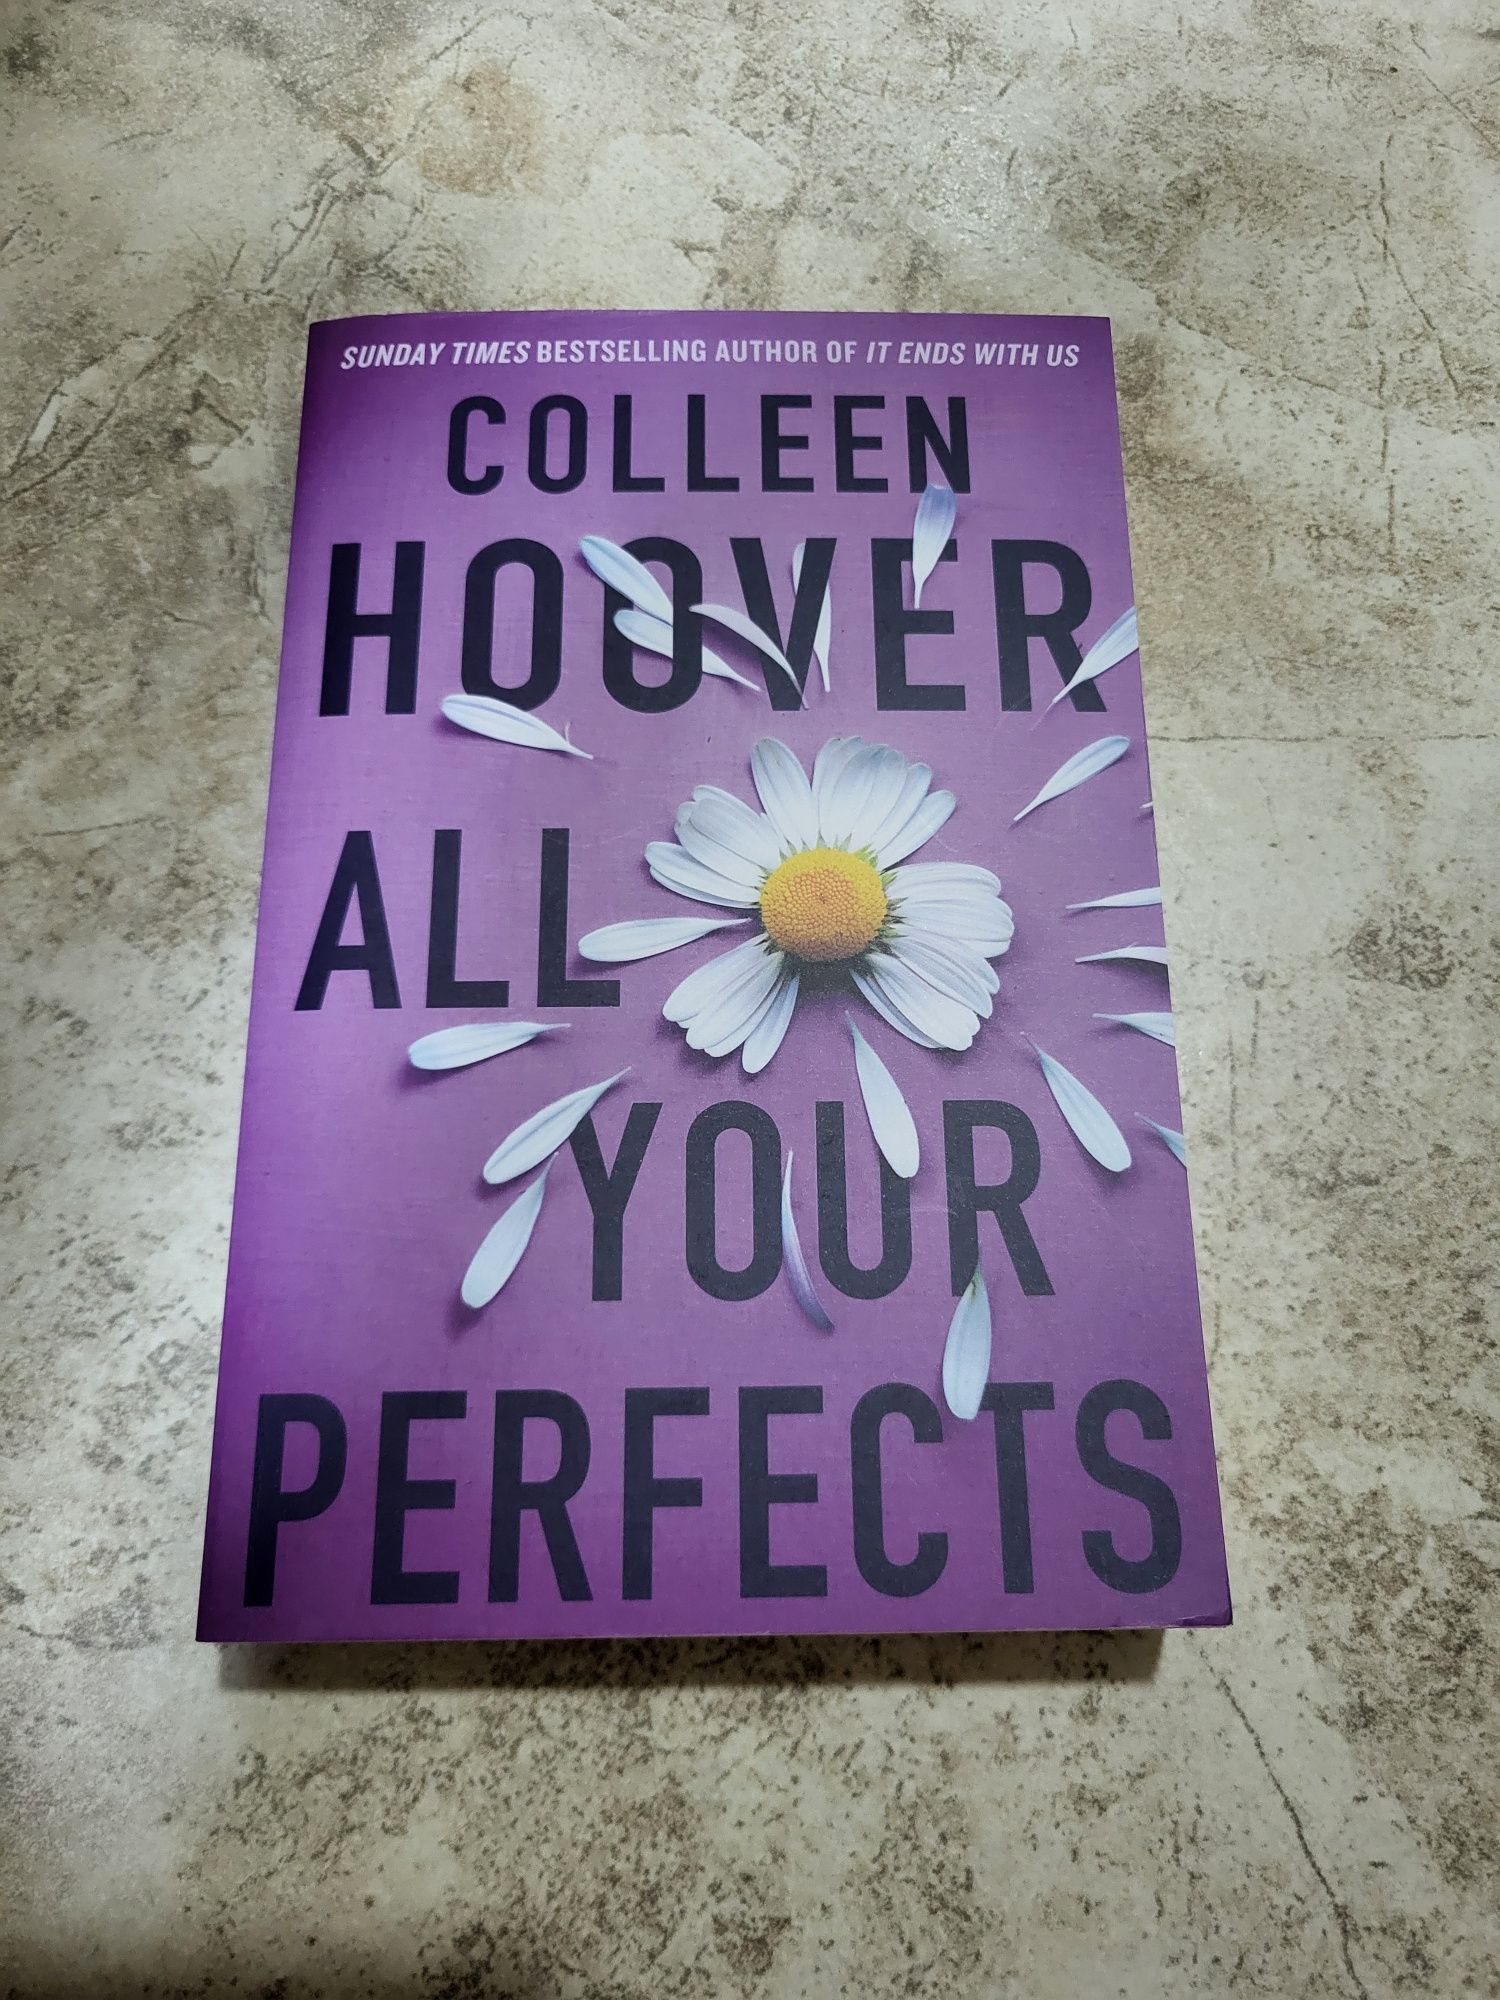 Livro all your perfects de Colleen Hoover